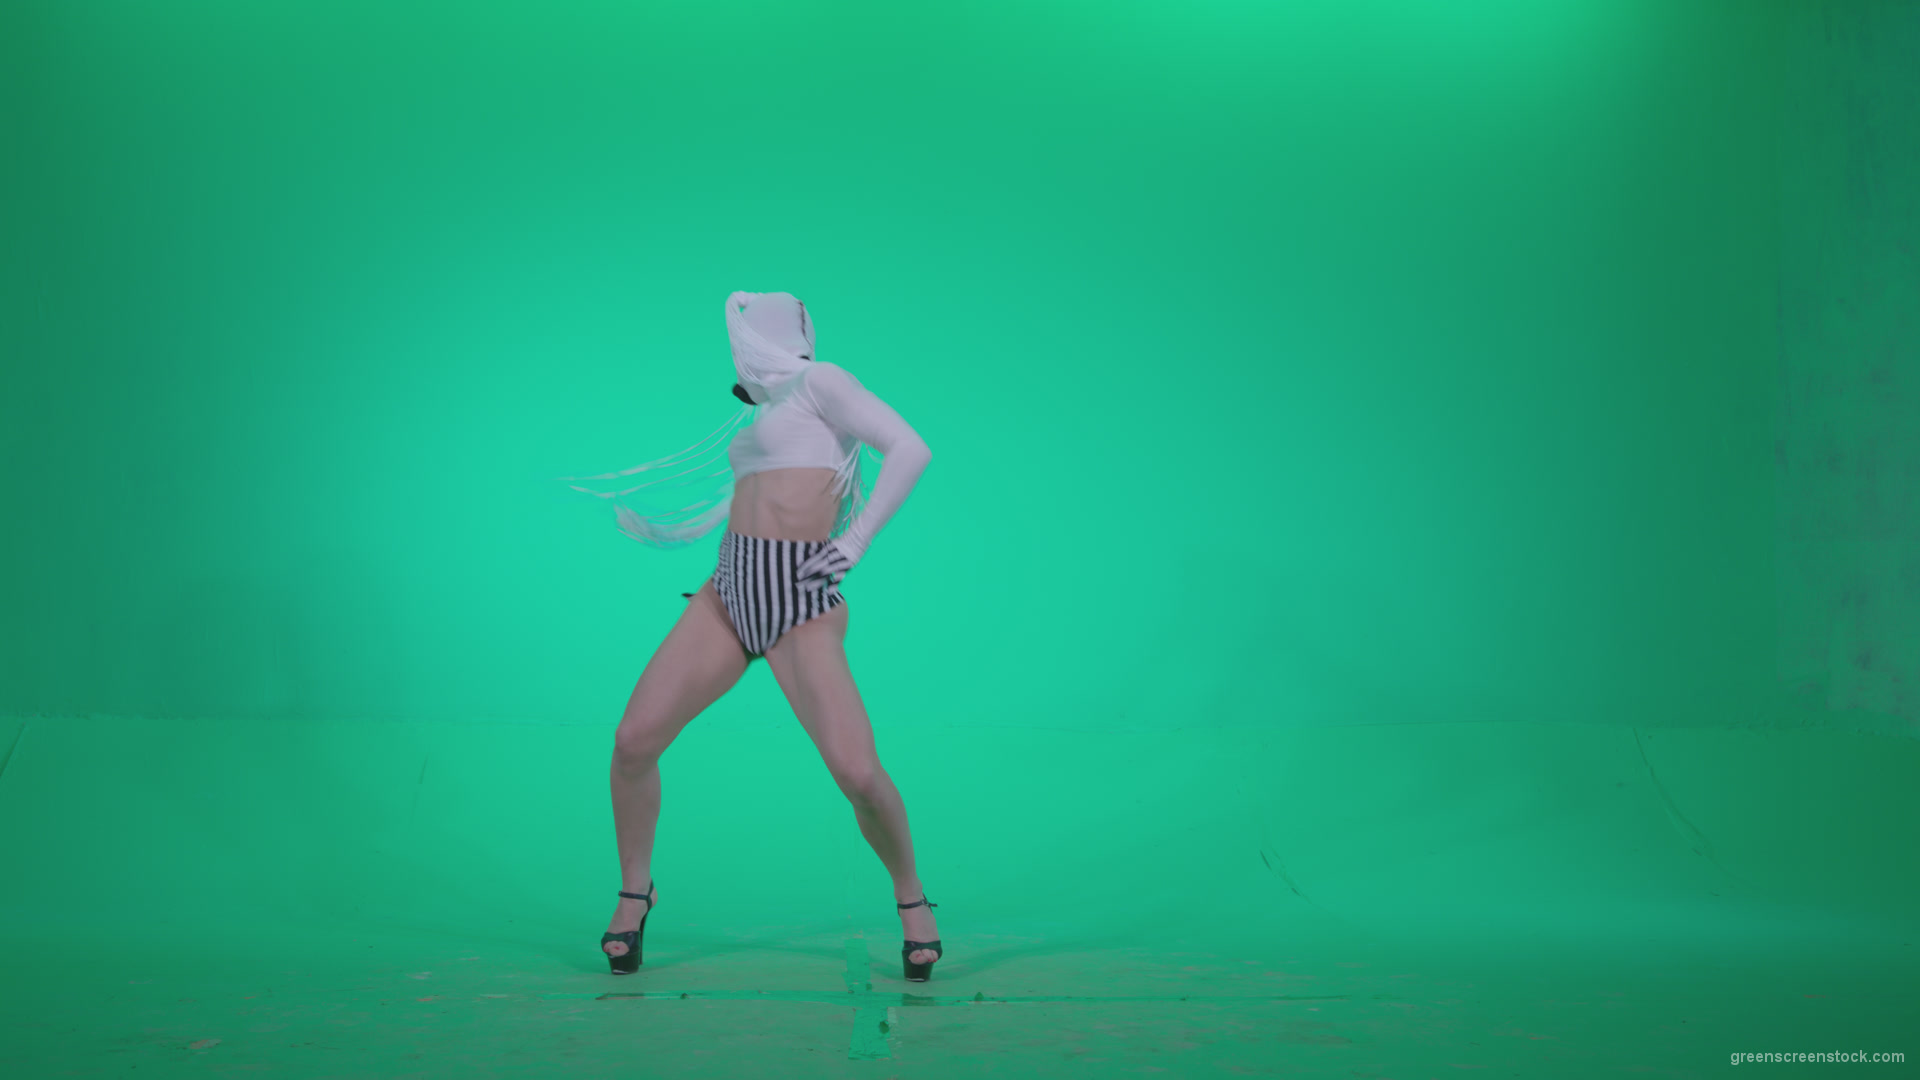 Go-go-Dancer-with-Latex-Top-t7-Green-Screen-Video-Footage_001 Green Screen Stock